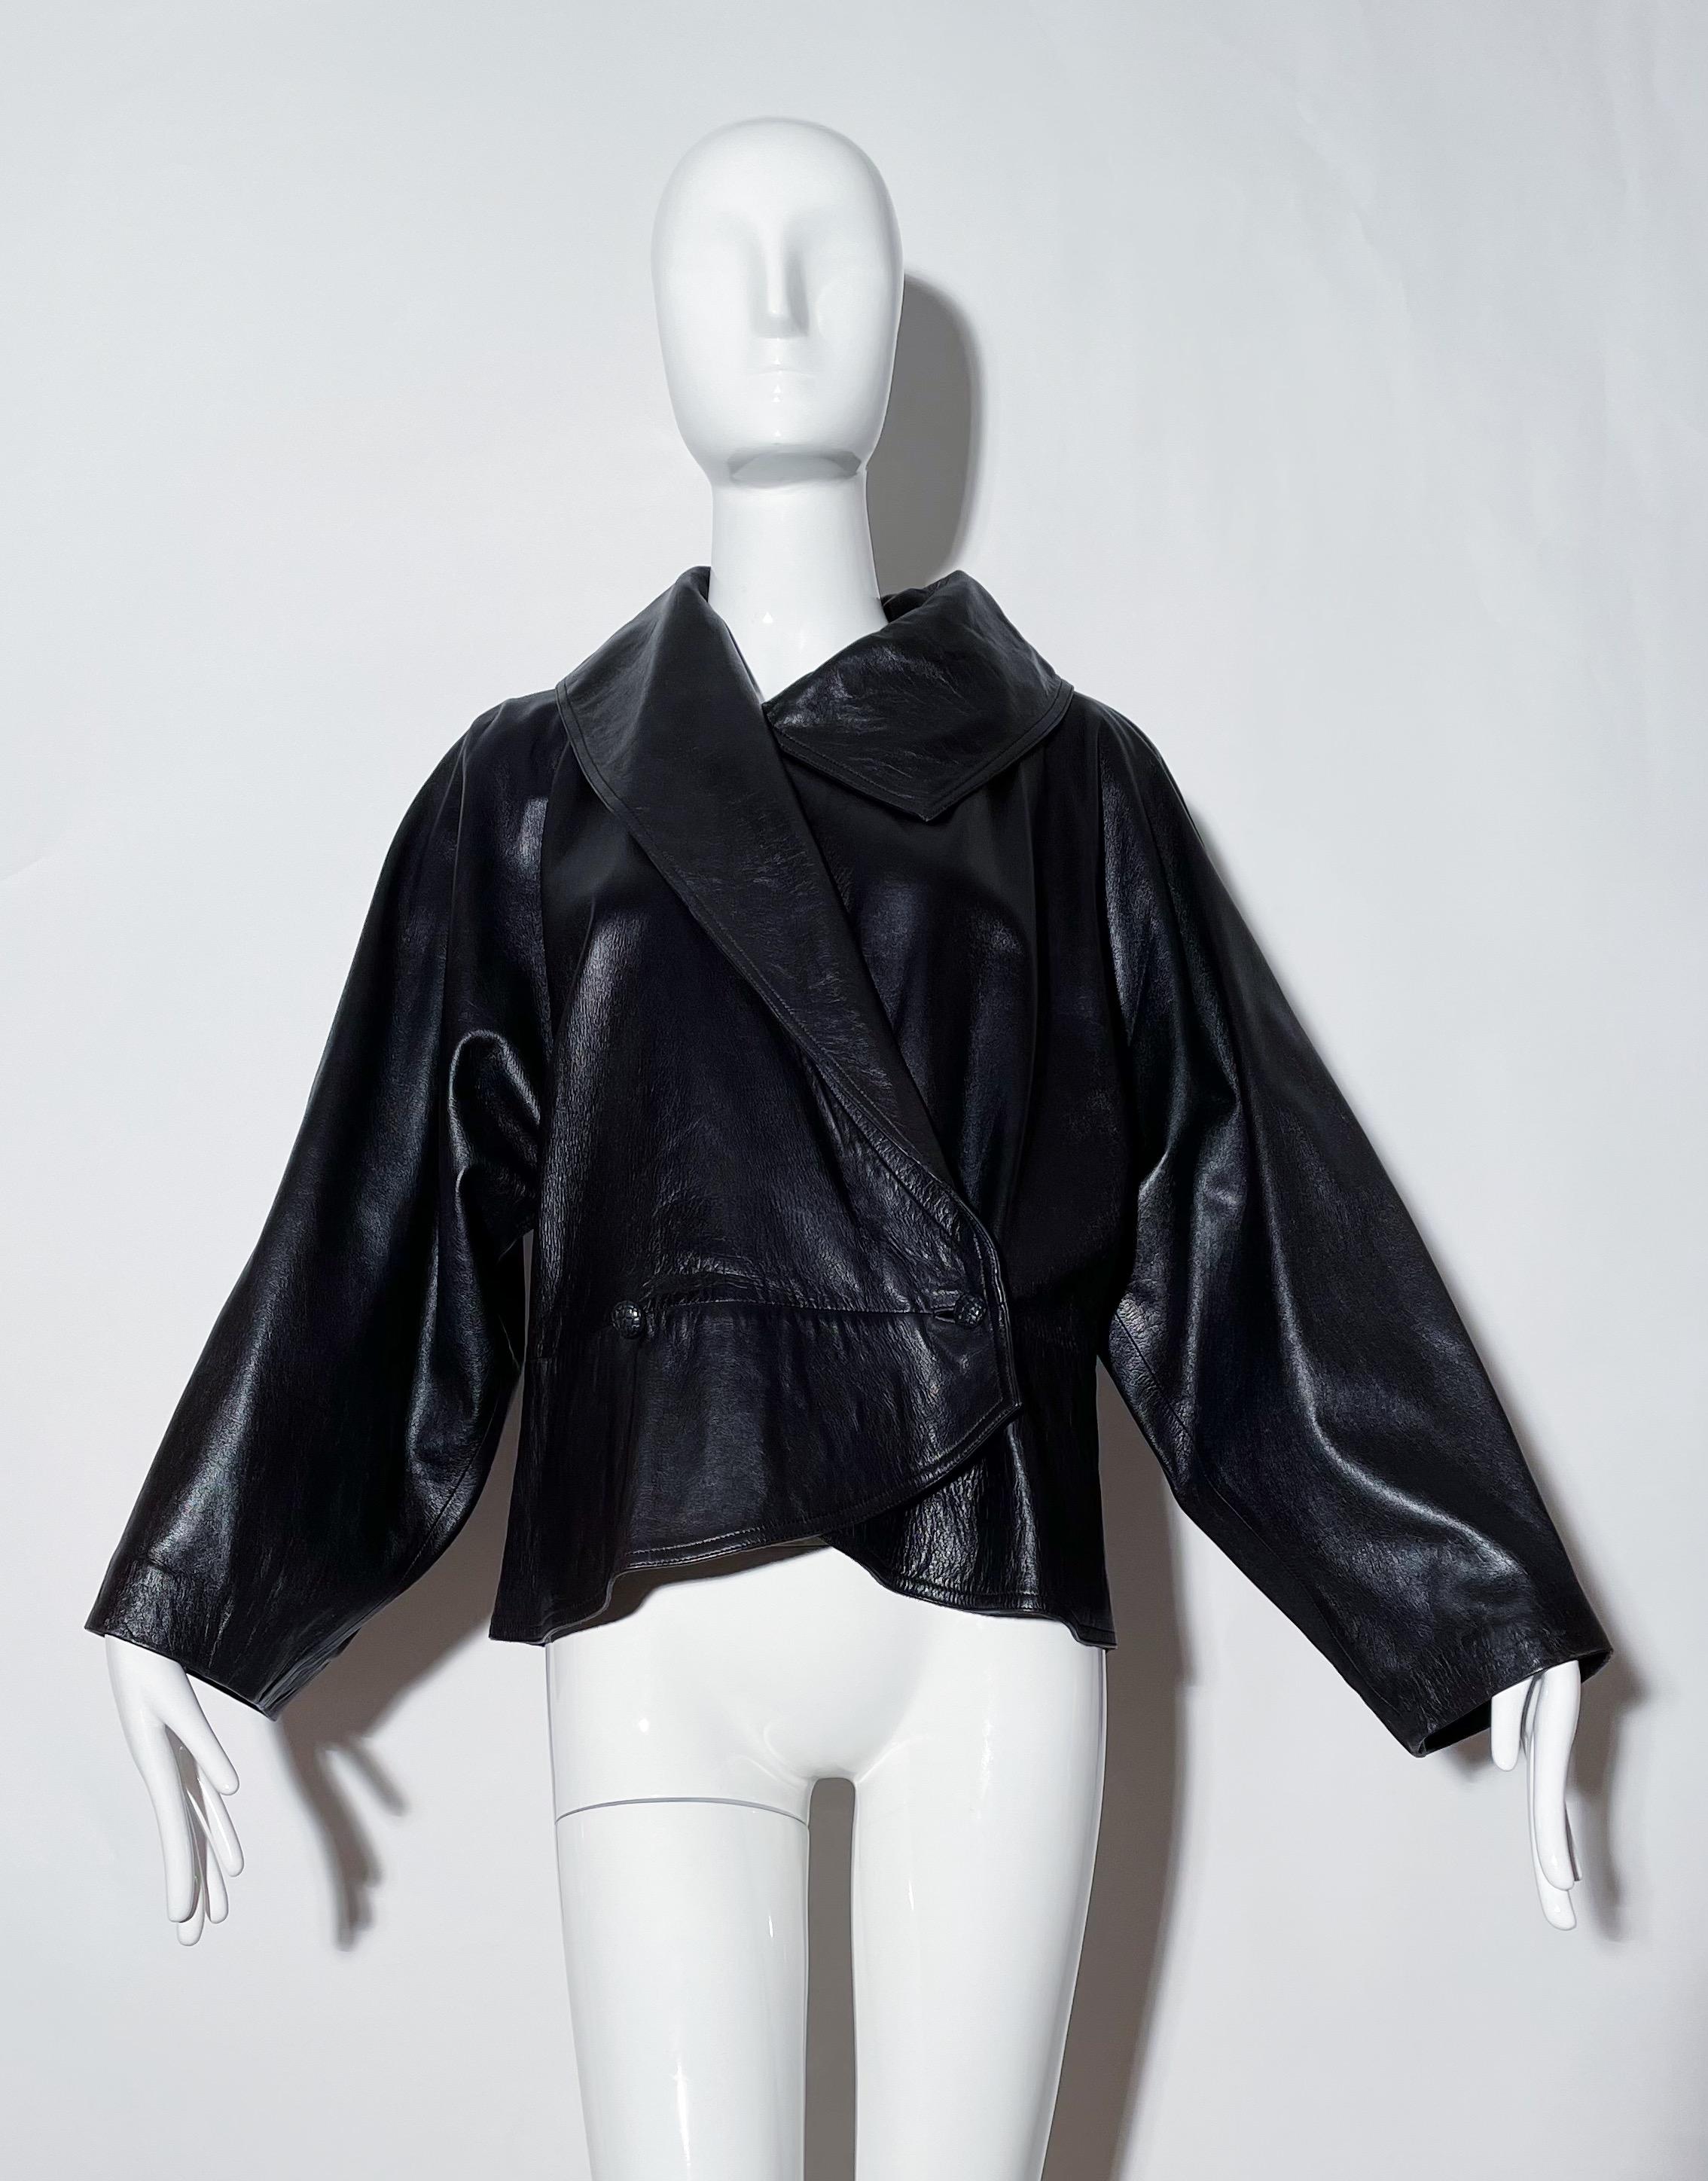 Black leather jacket. Peplum style. Collared. Wide arms. Lined. Leather. Made in Italy. 
*Condition: Great vintage condition. One Flaw along seam on front ( as pictured) 

Measurements Taken Laying Flat (inches)—
Shoulder to Shoulder: 17 in.
Sleeve